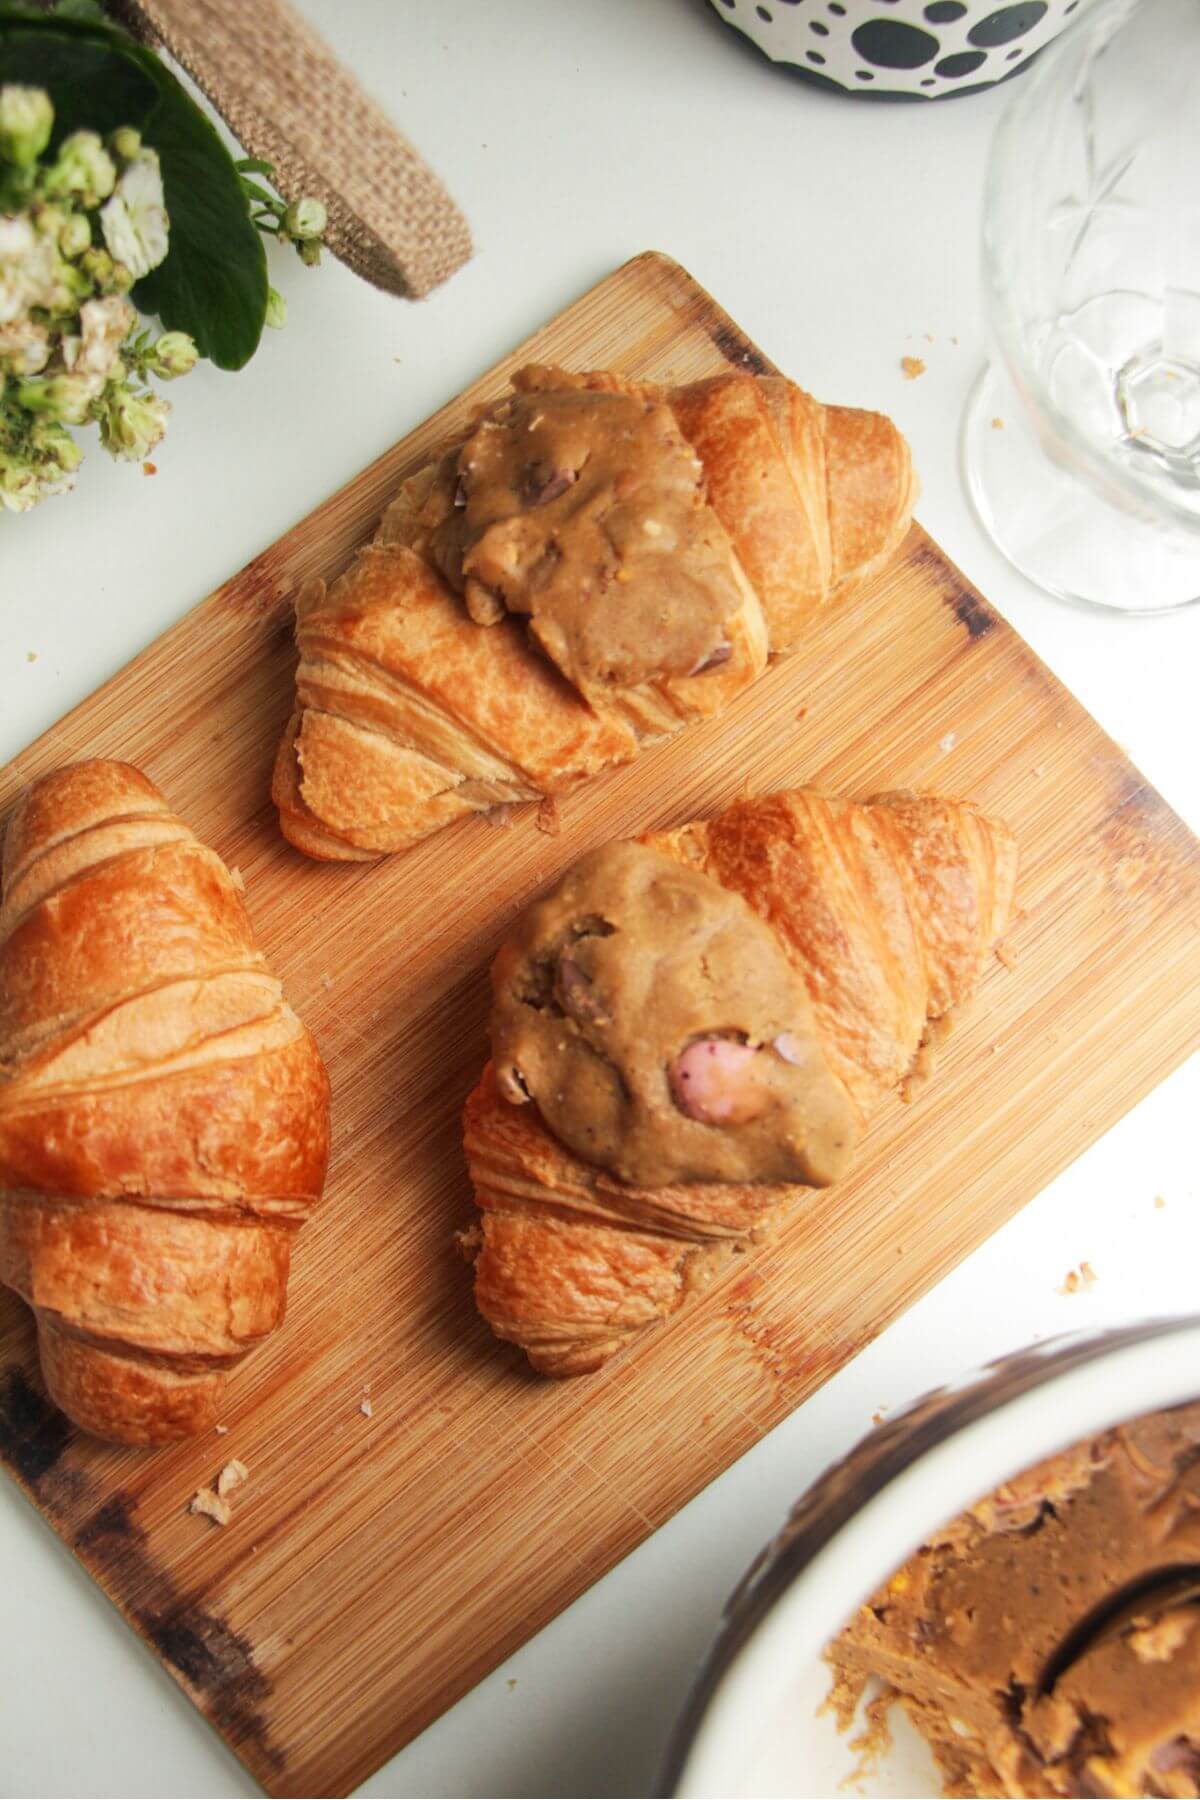 Three croissants on a wooden board, two topped with cookie dough.